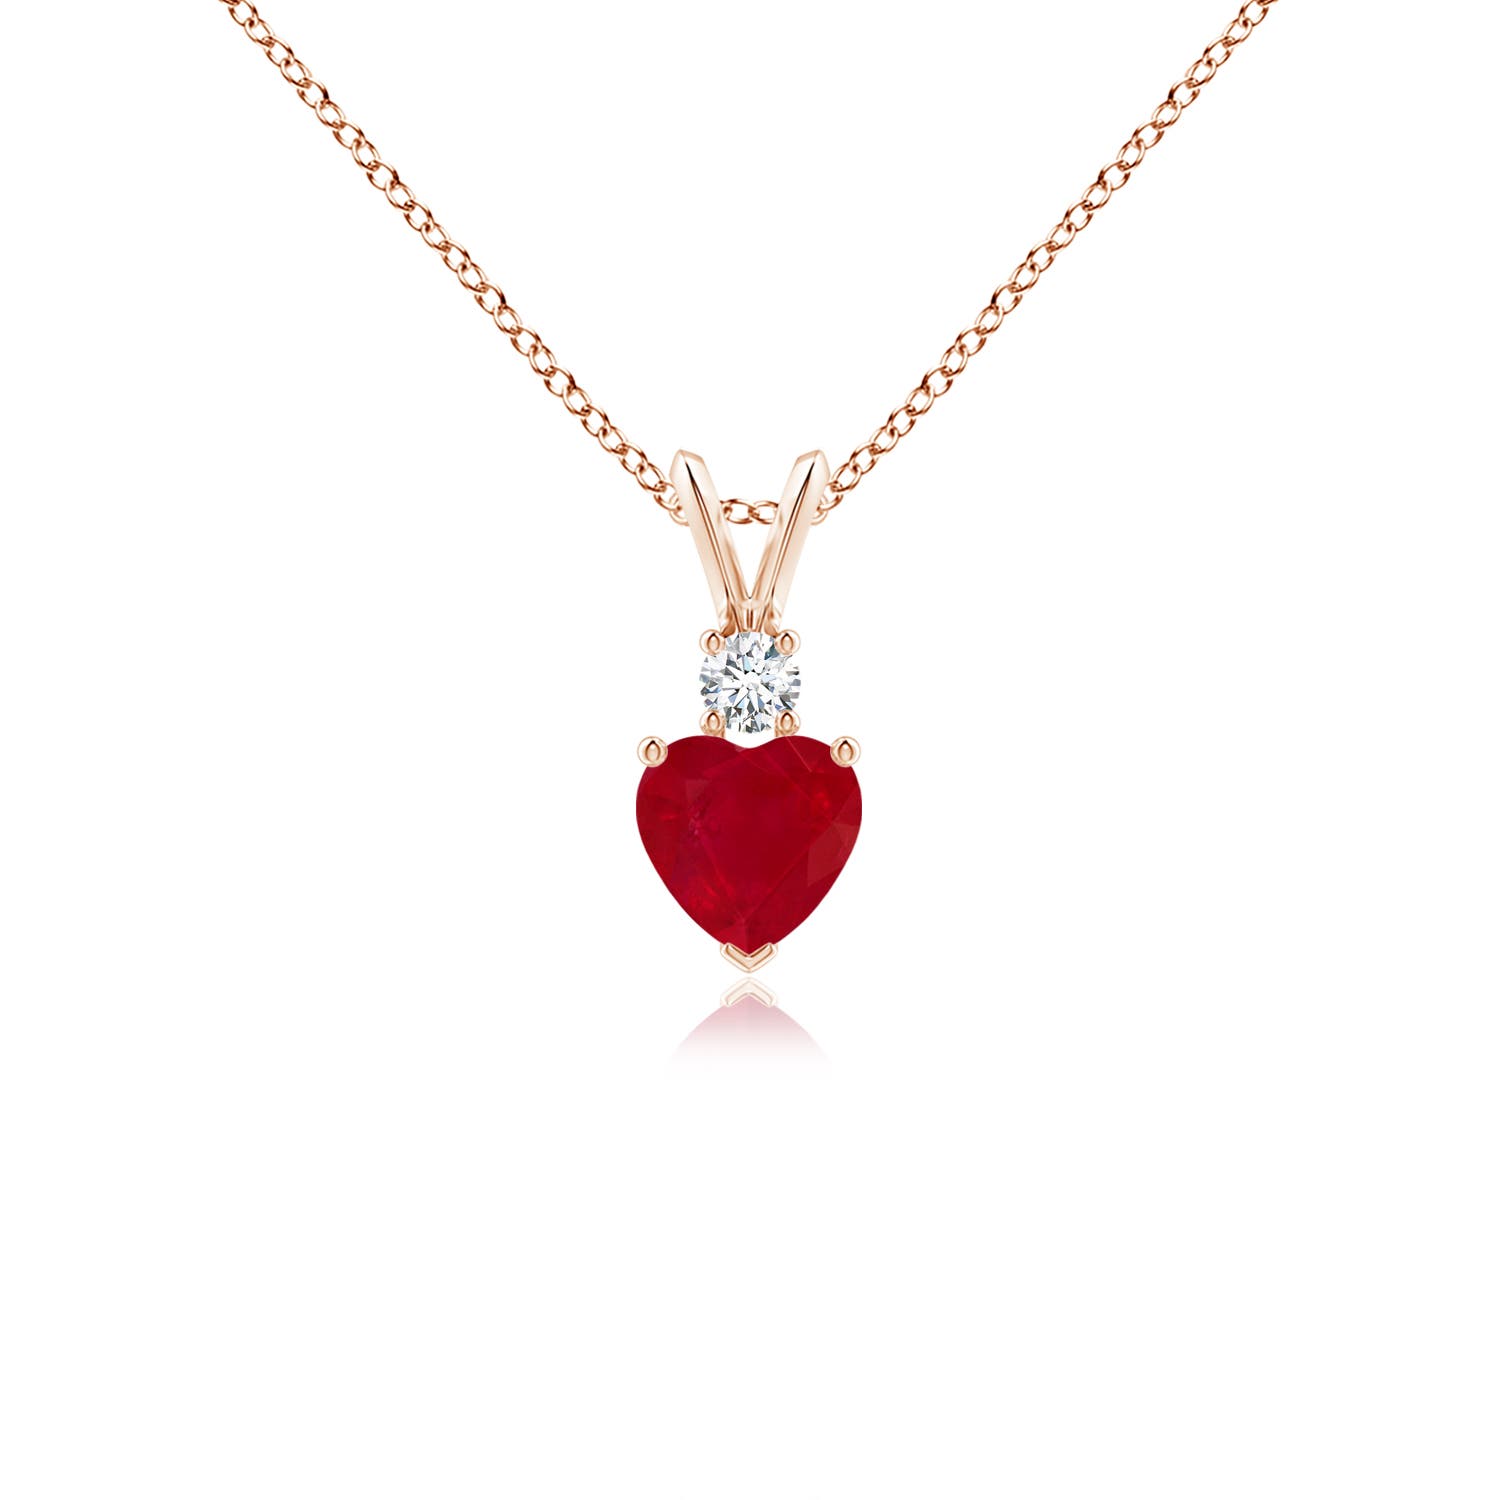 AA - Ruby / 0.59 CT / 14 KT Rose Gold